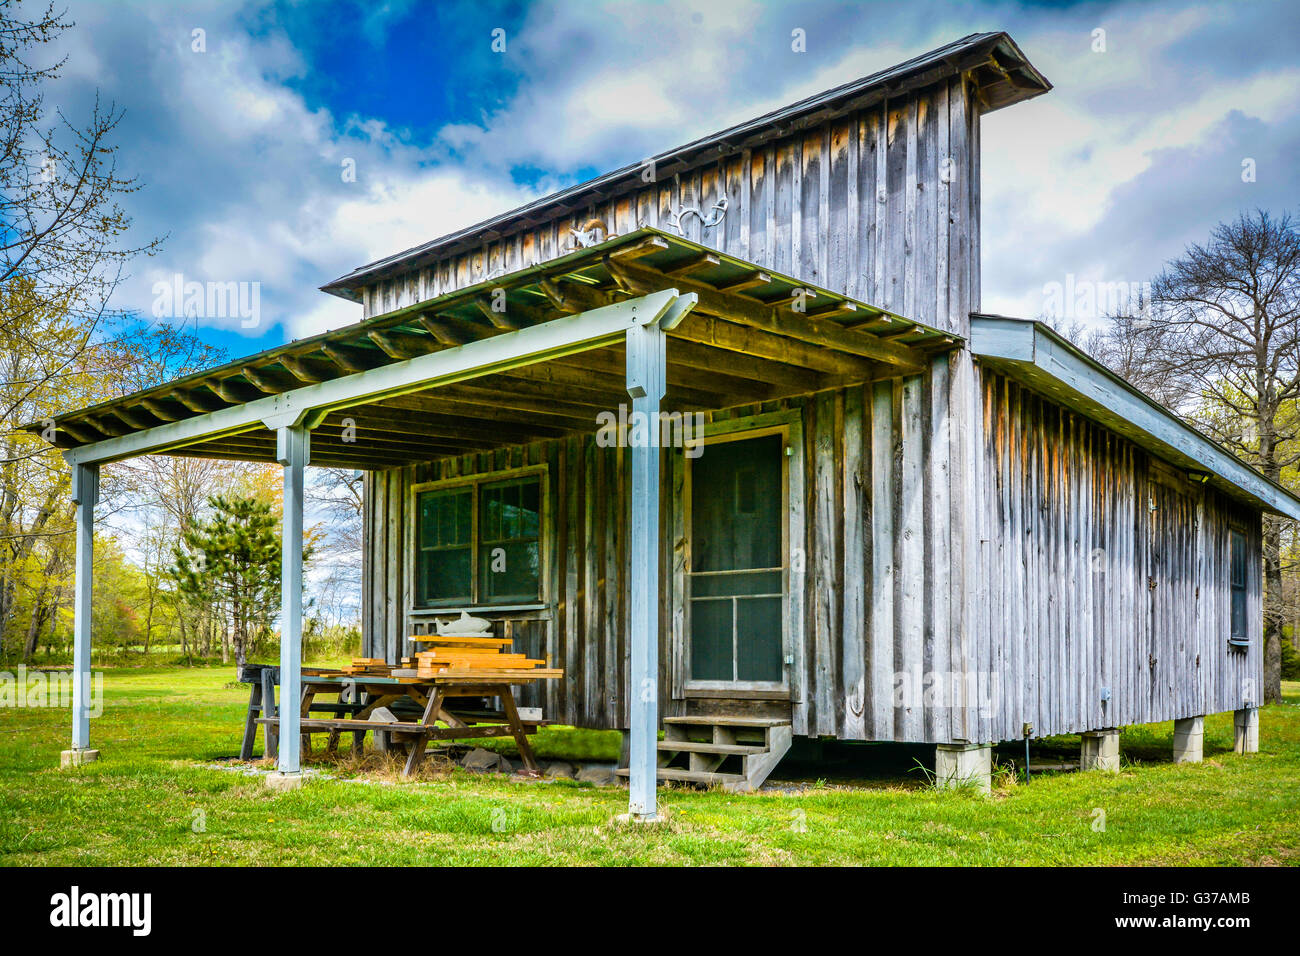 A rustic wooden cabin in the style of a vintage general store Stock Photo